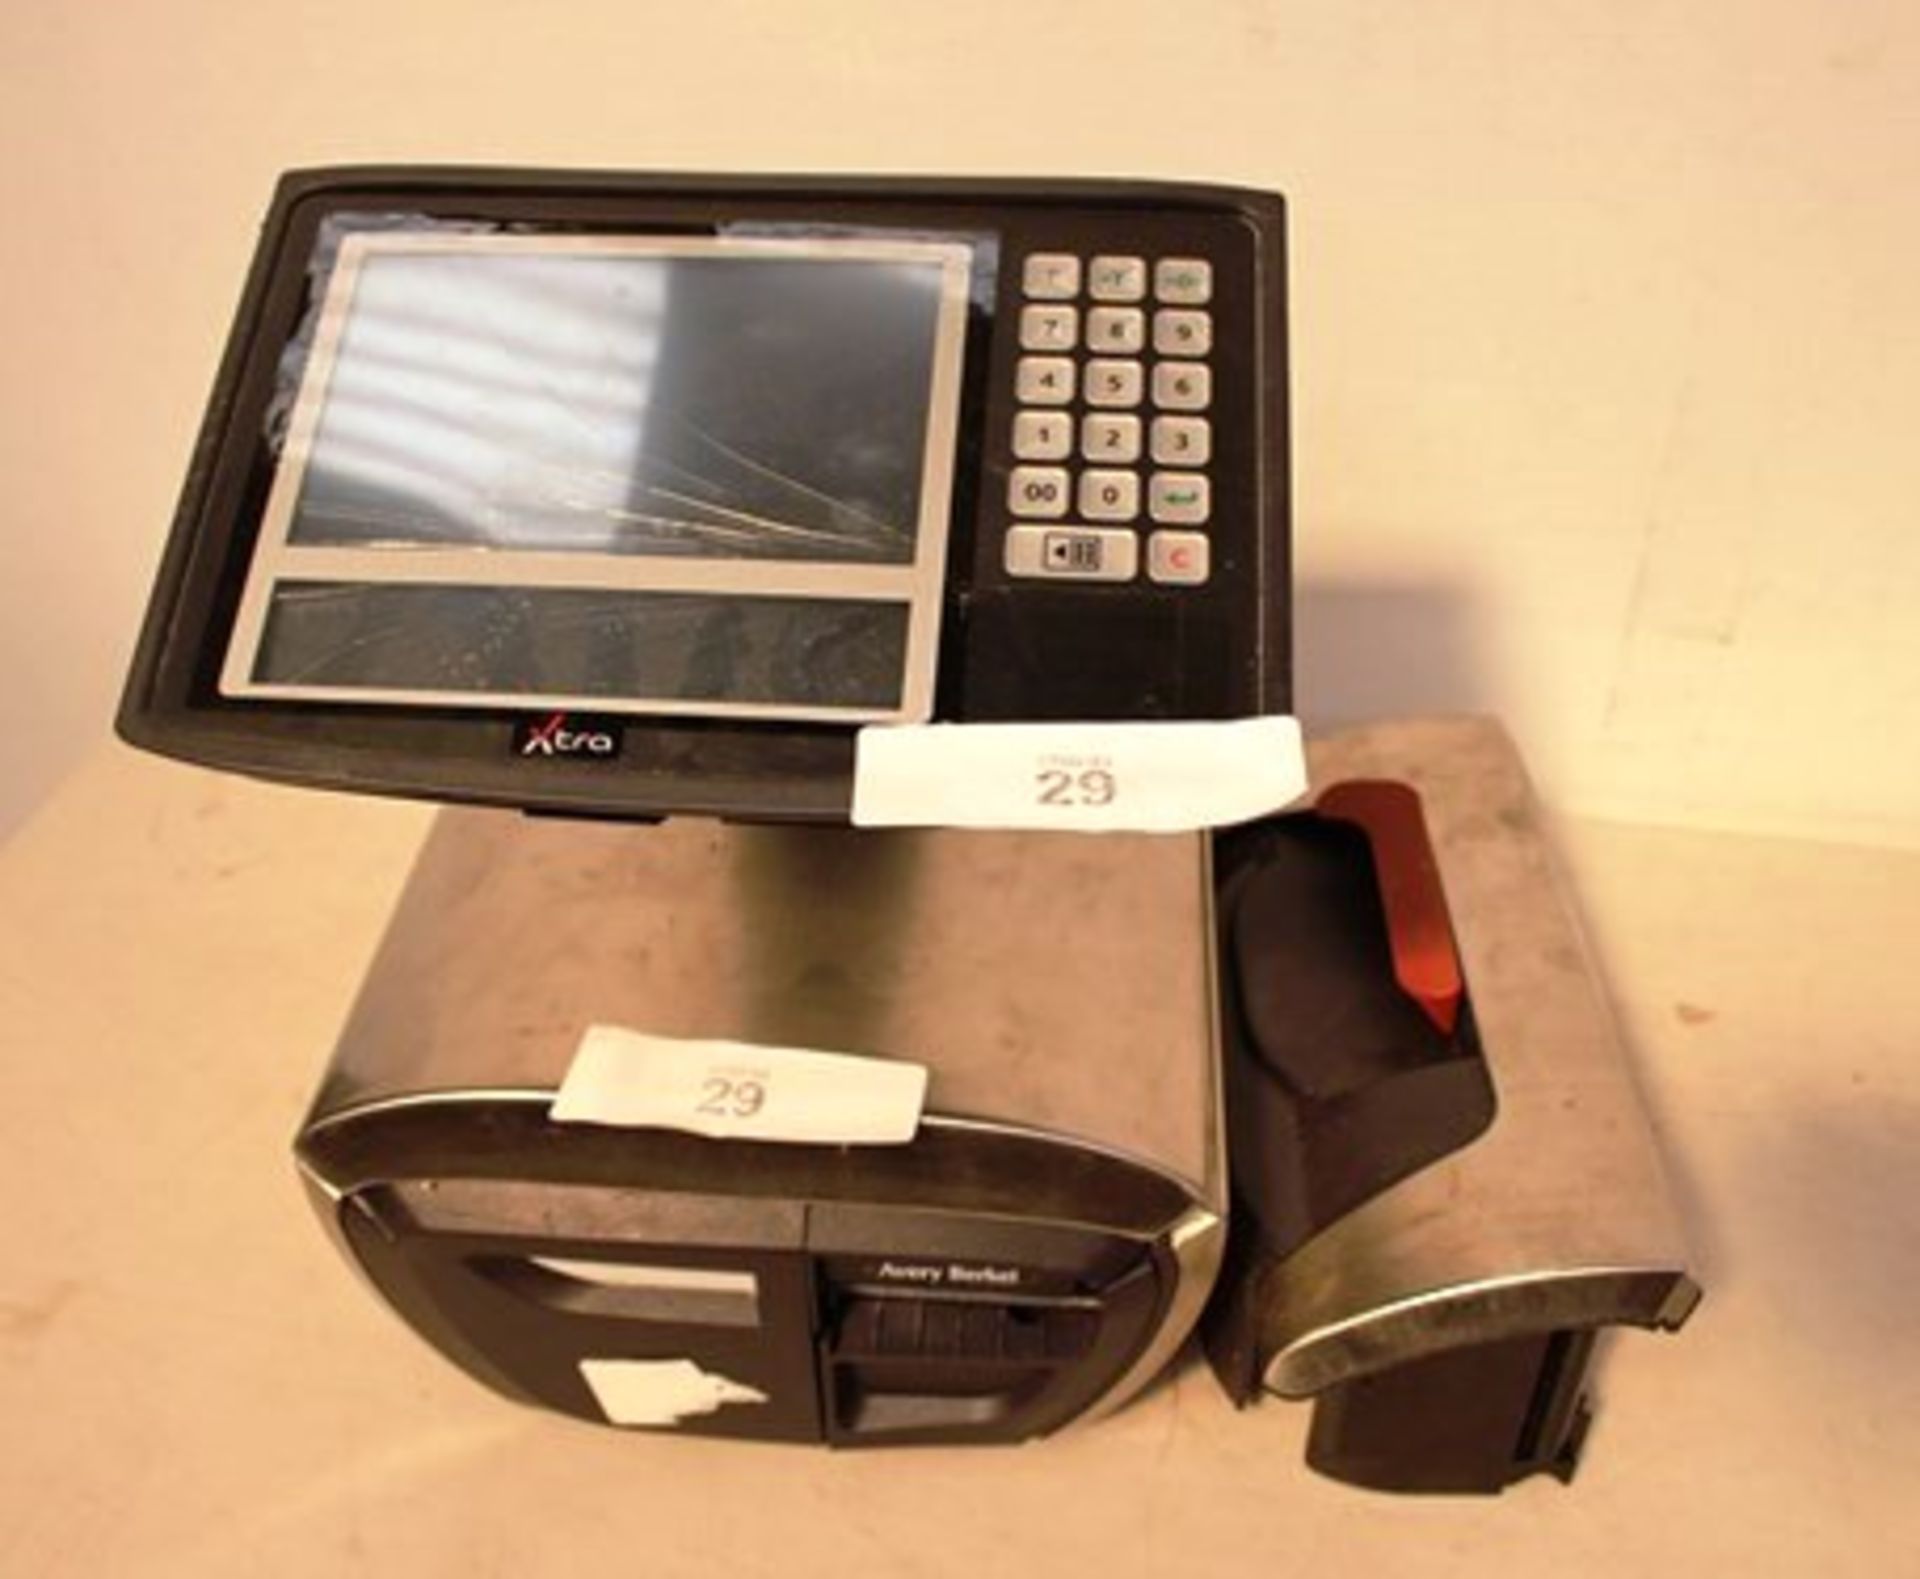 1 x Avery Berkel Xtra commercial weighing scales, display and printer unit only - Spares and